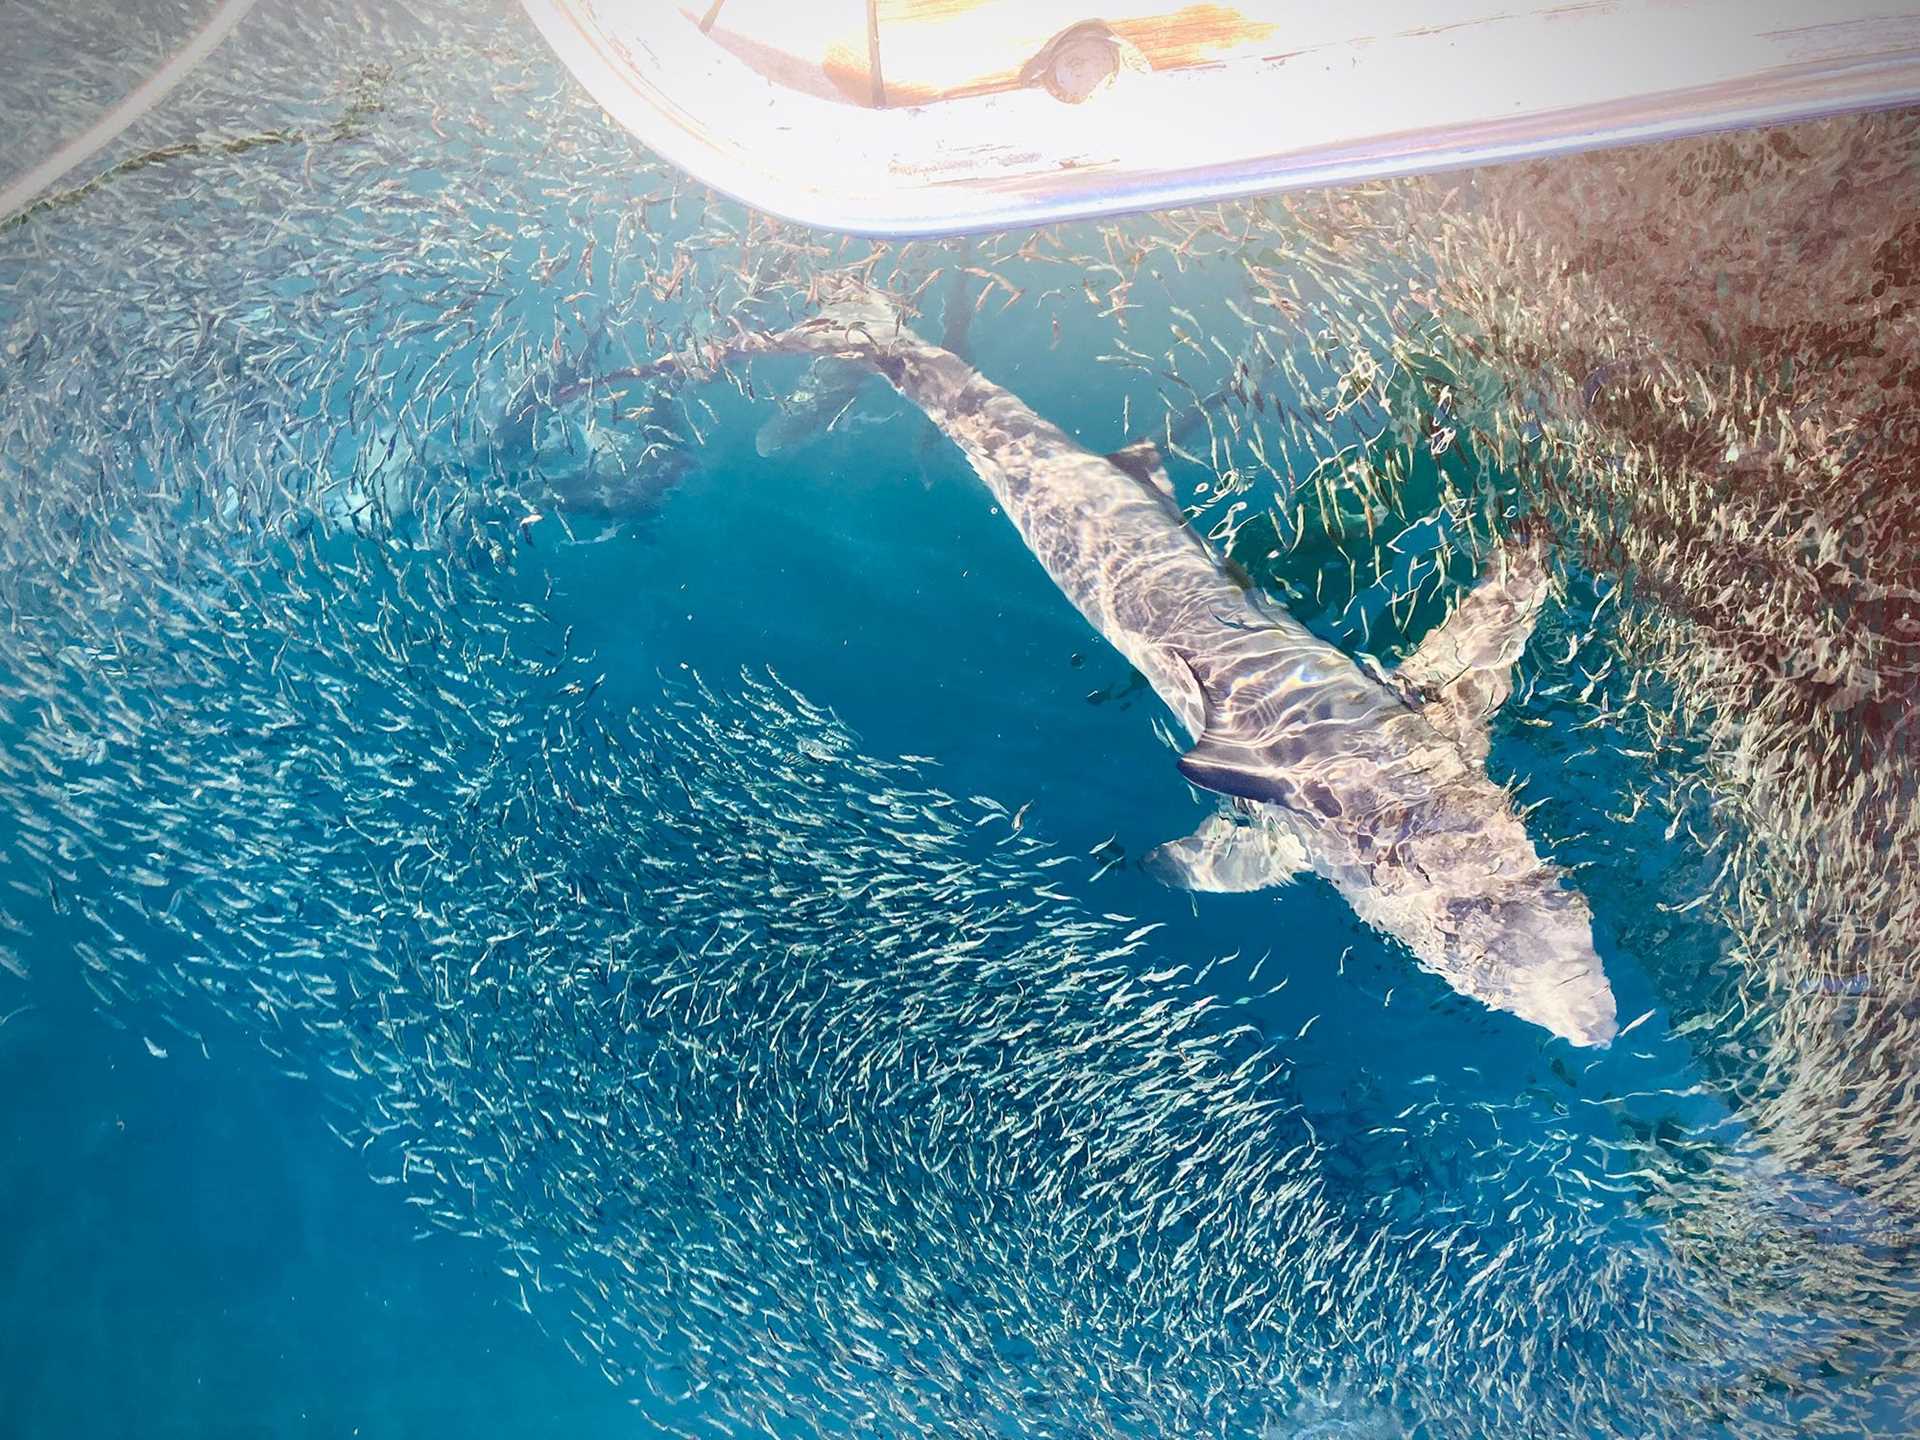 shark surrounded by many small silver fish